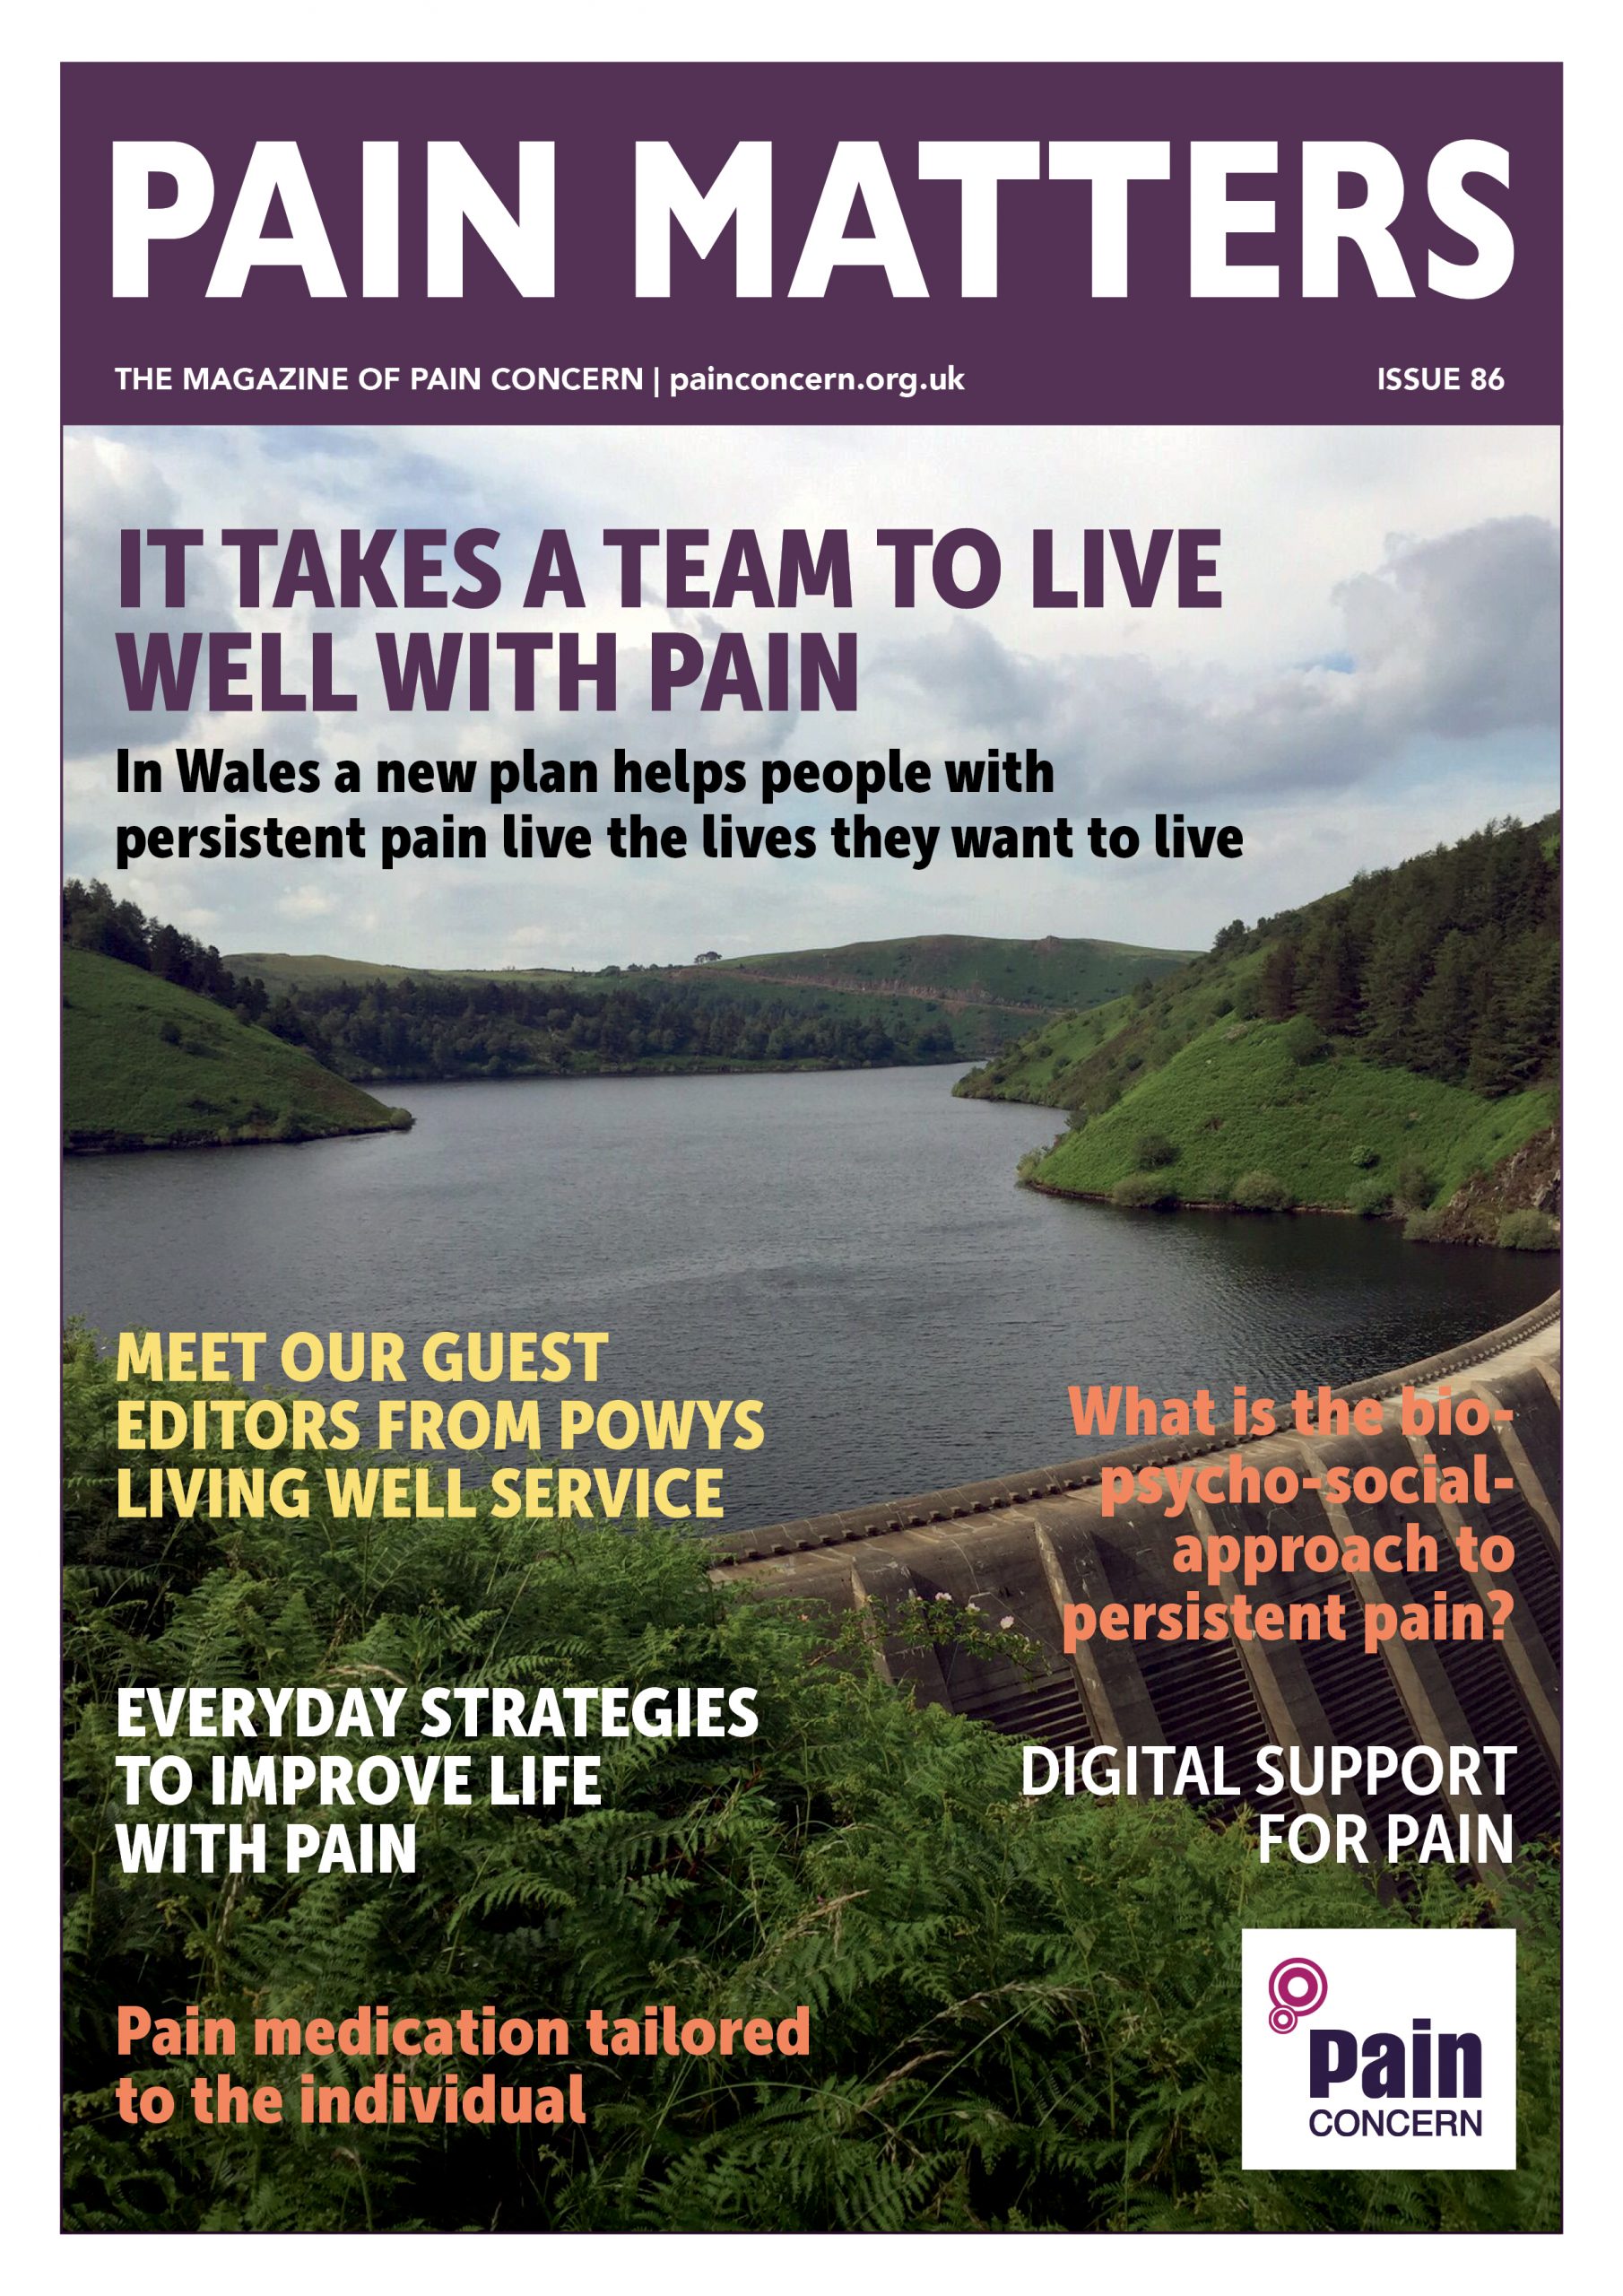 Pain Matters 86 magazine front cover.